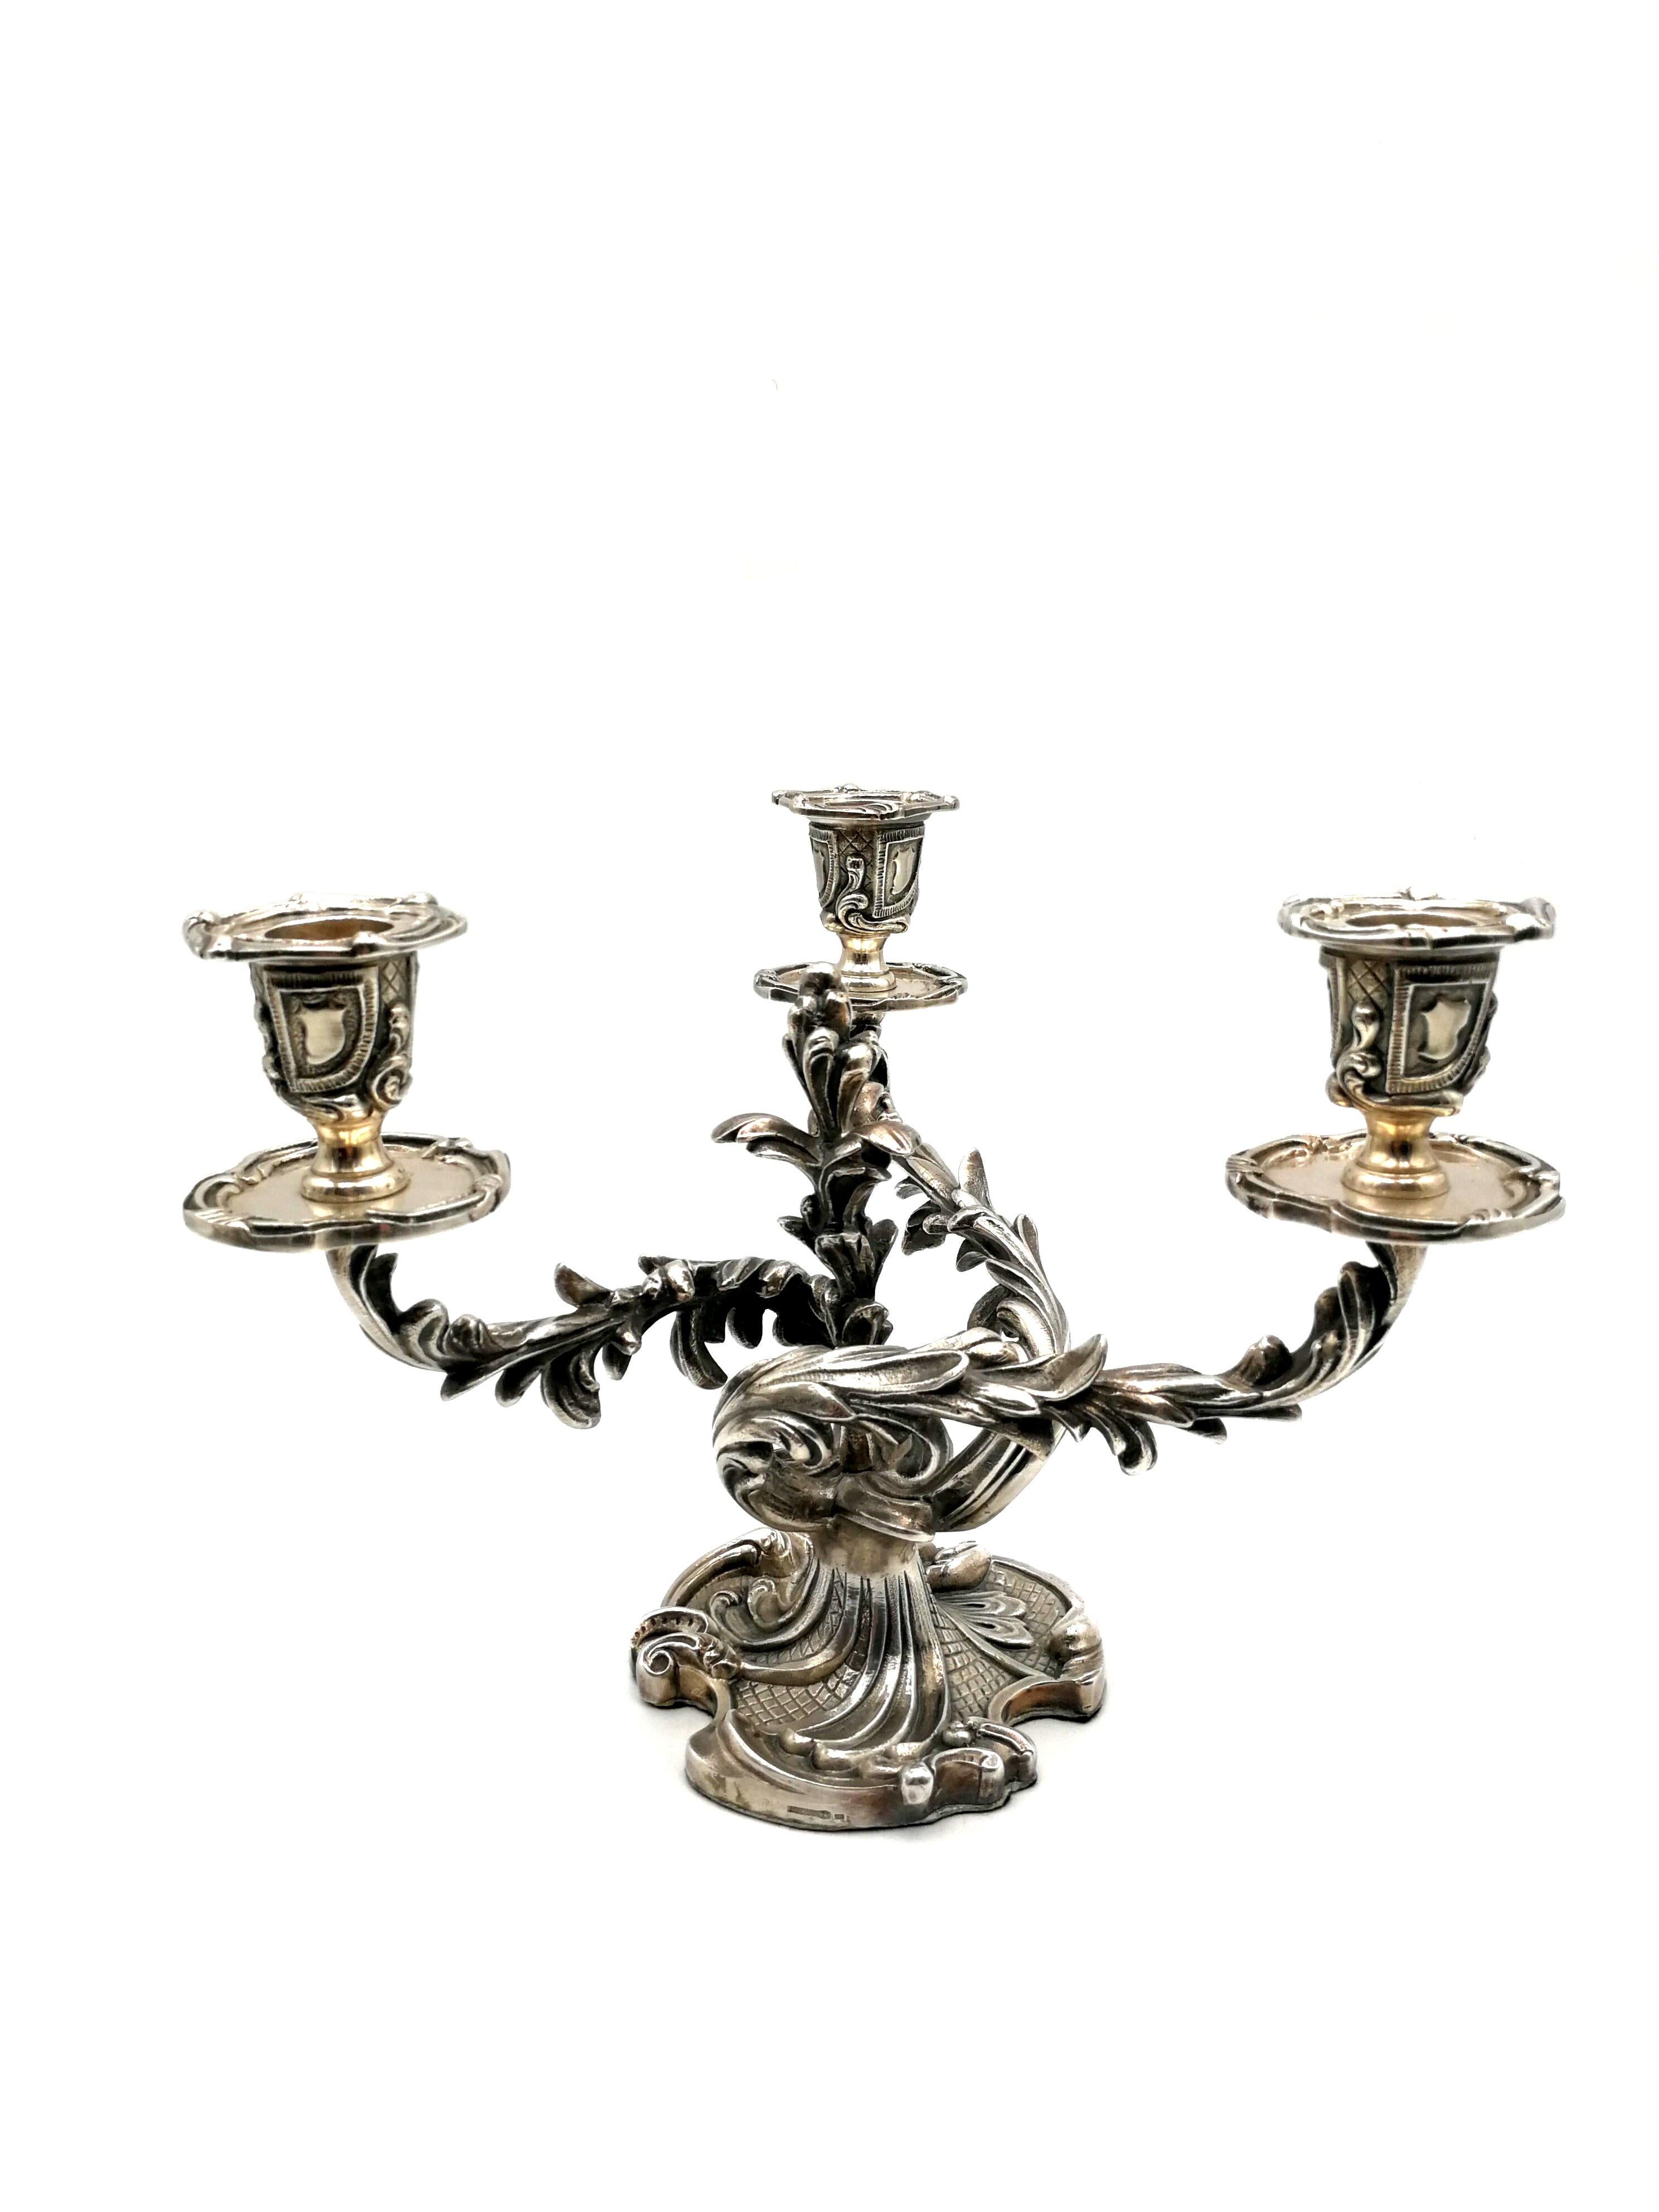 20th Century Wiskeman Pair of Rococo Silver Plated Candelabra